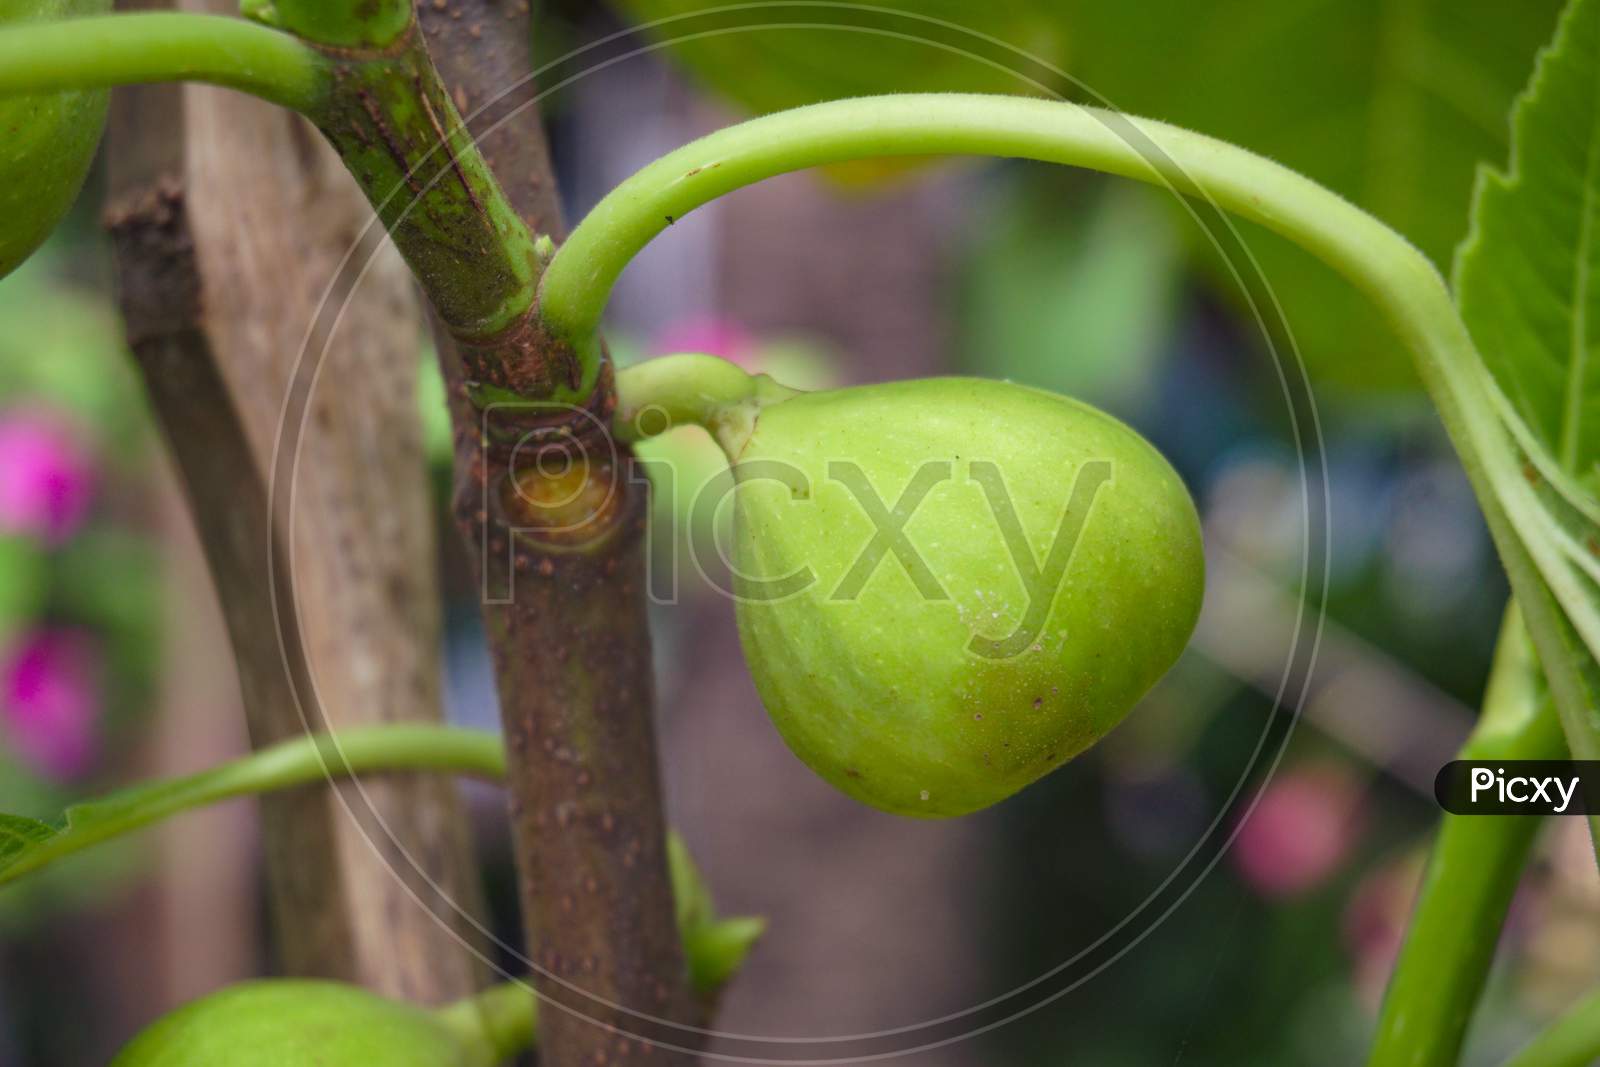 Dumur Tree, Dumur Fruit , Ficus Racemosa (Ficus Glomerata Roxb.) Is A Species Of Plant In The Family Moraceae. Popularly Known As The Cluster Fig Tree,